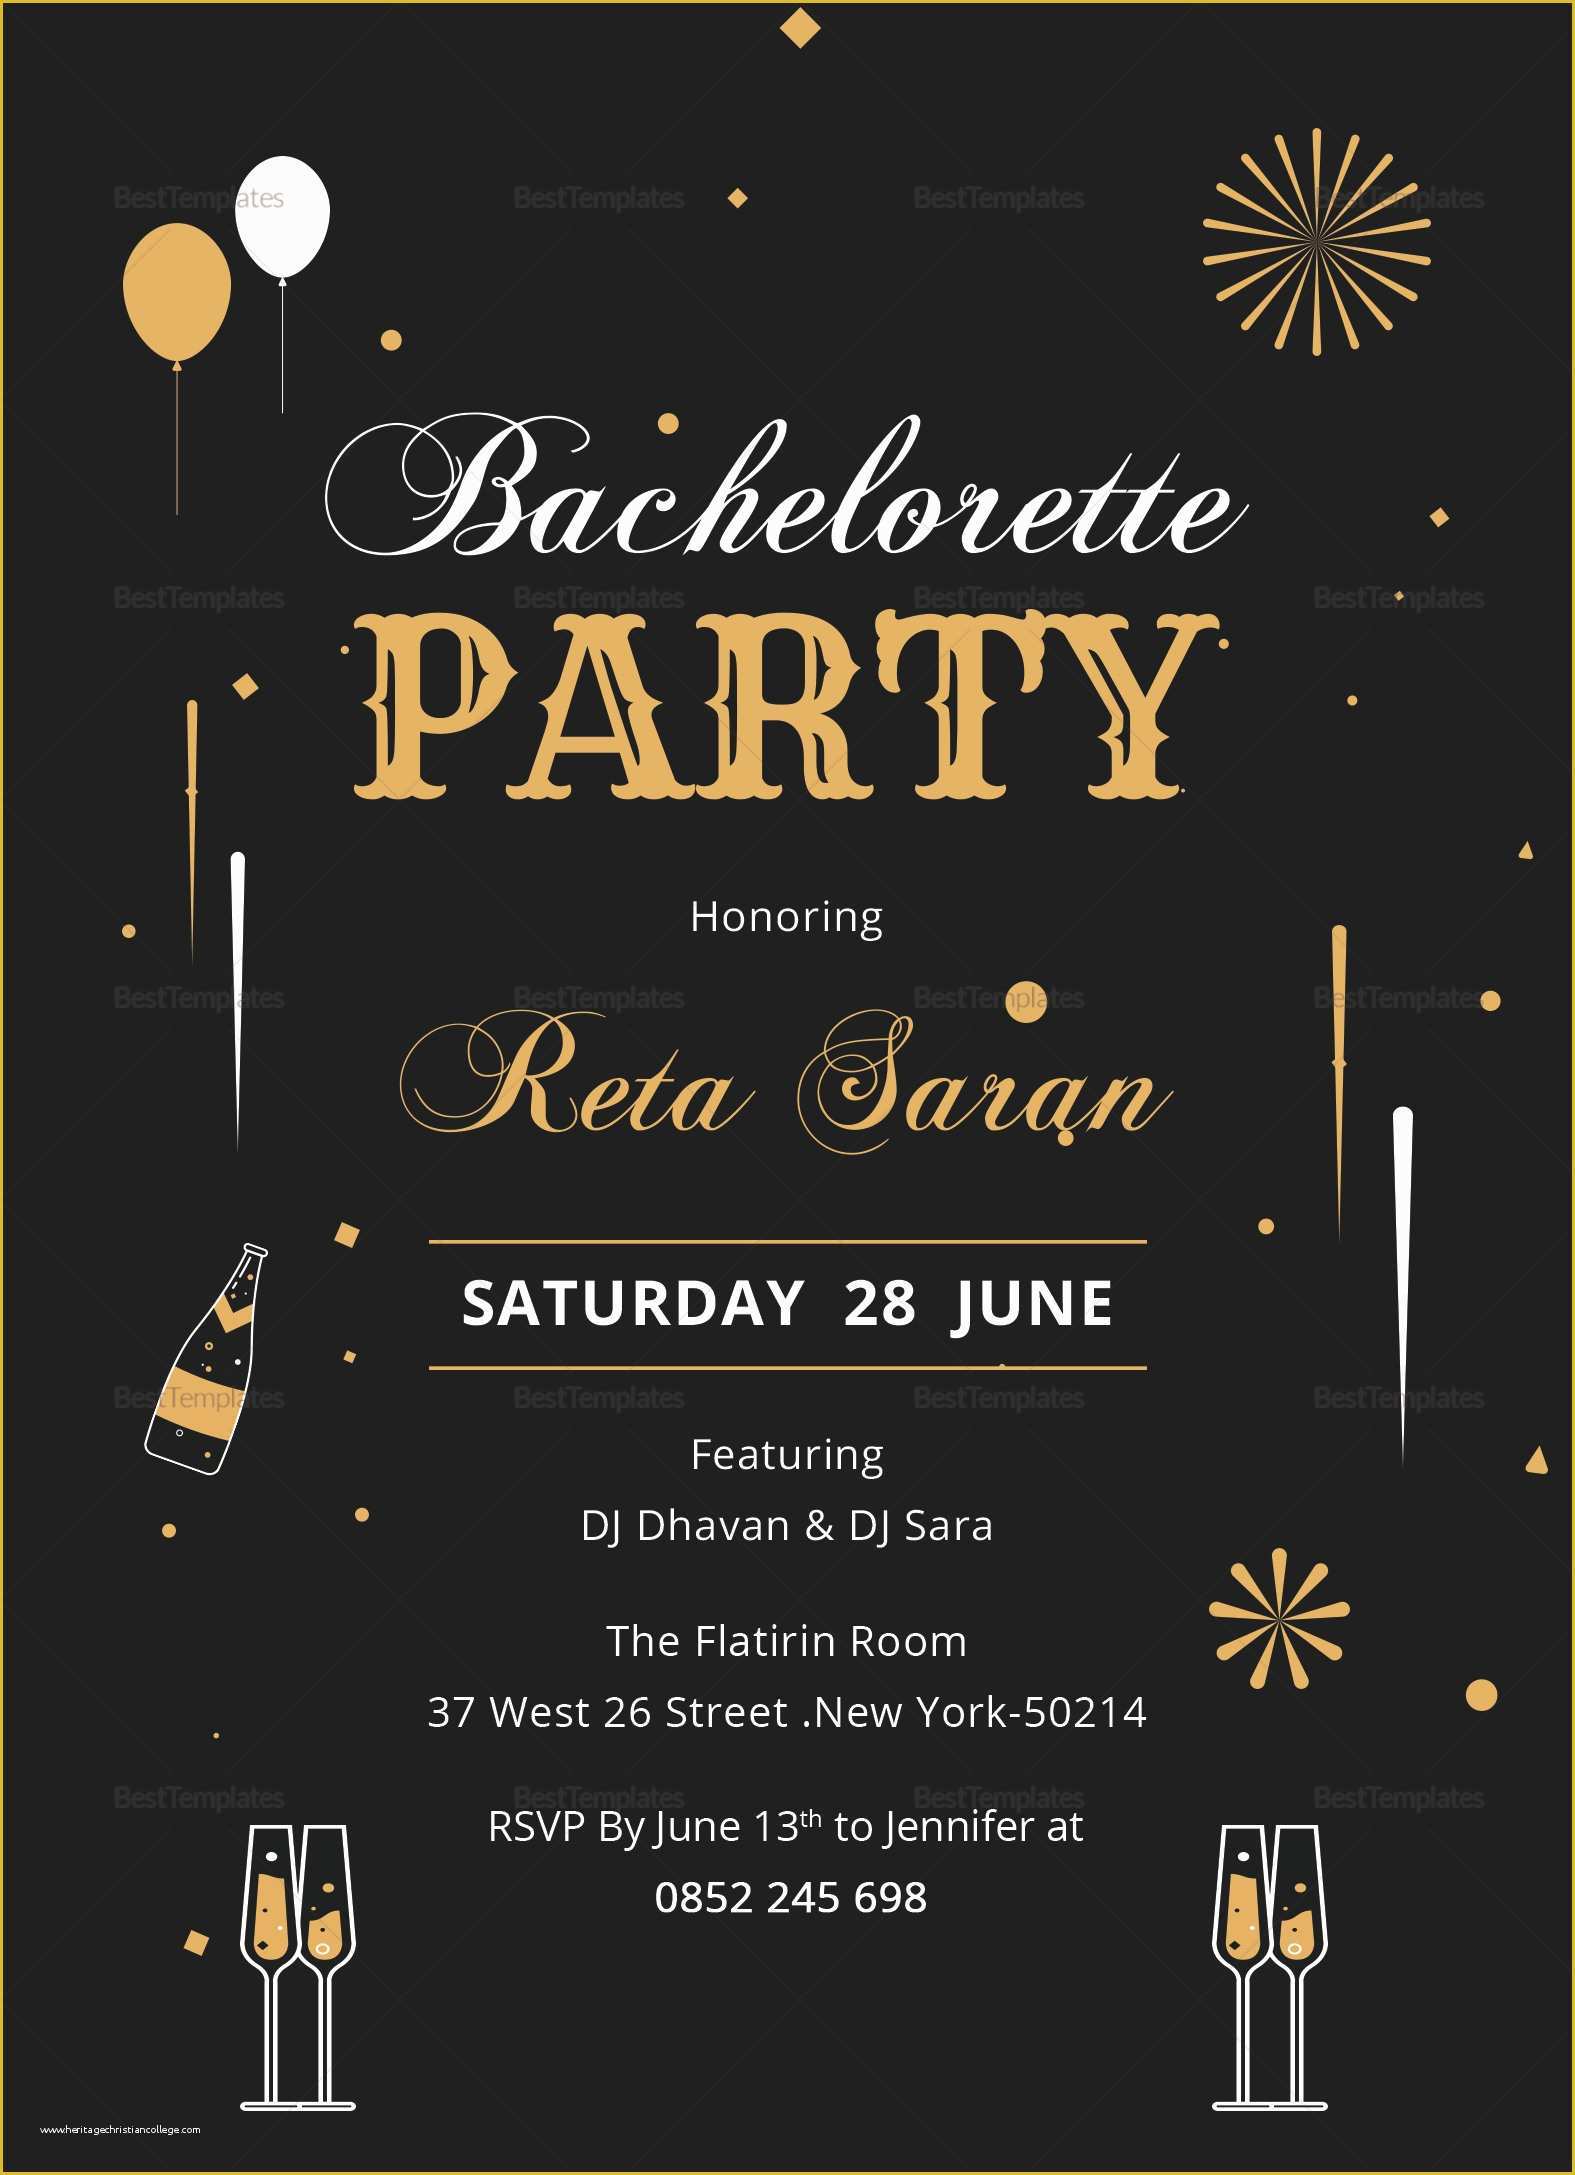 Bachelorette Party Invitation Templates Free Download Of Bachelorette Party Invitation Card Design Template In Word